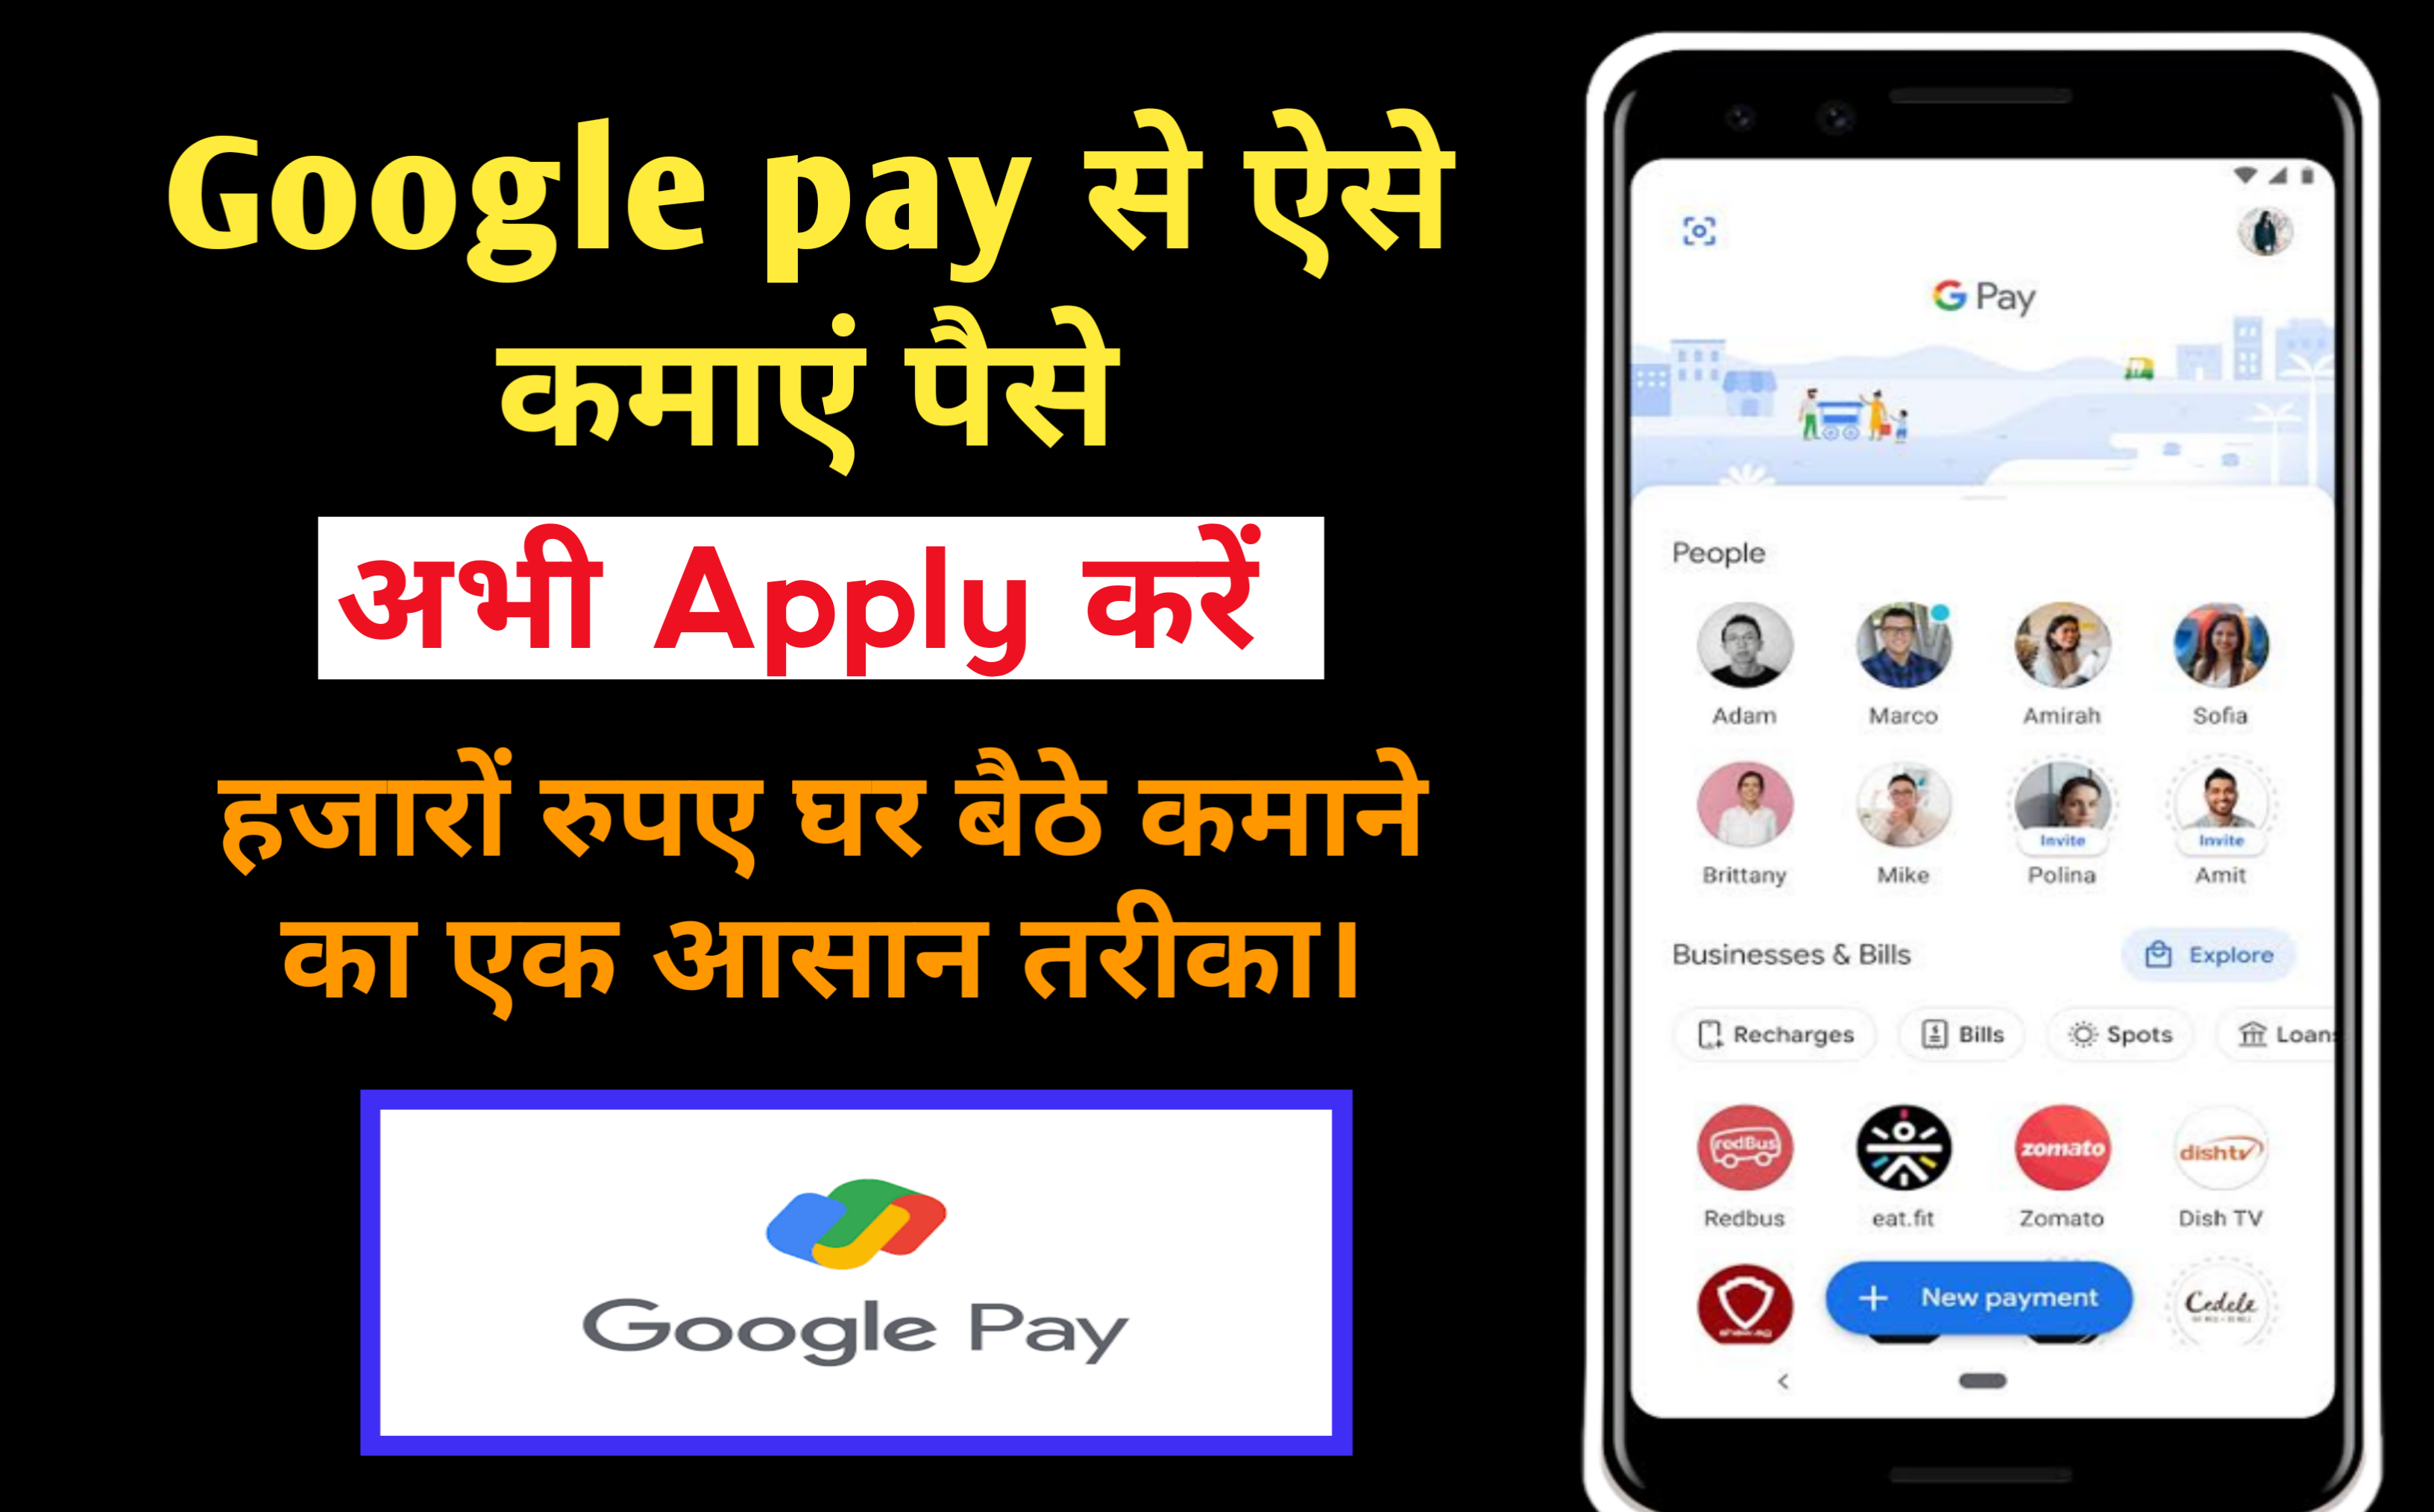 How To Make Money From Google Pay